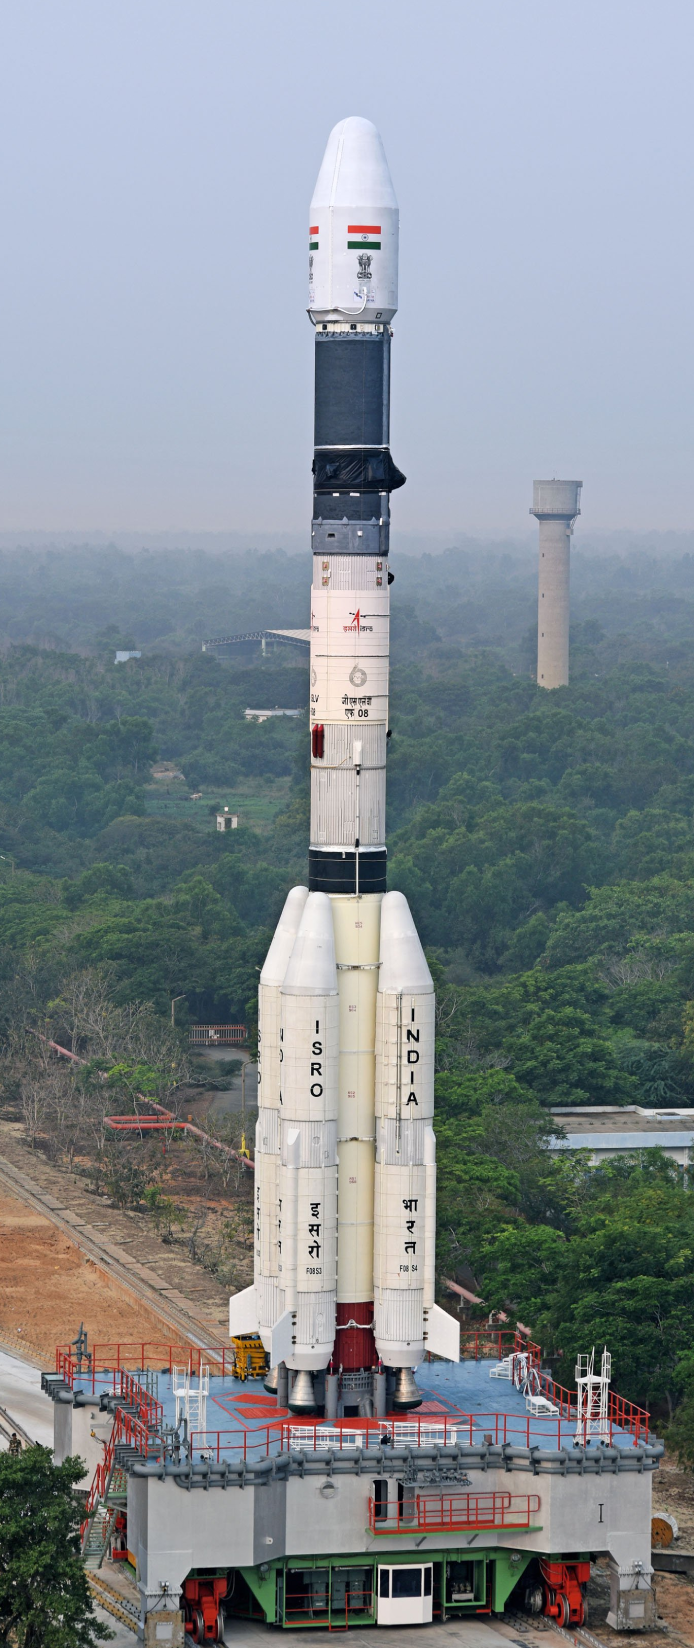 GSLV MK2 on its way to the launch pad.